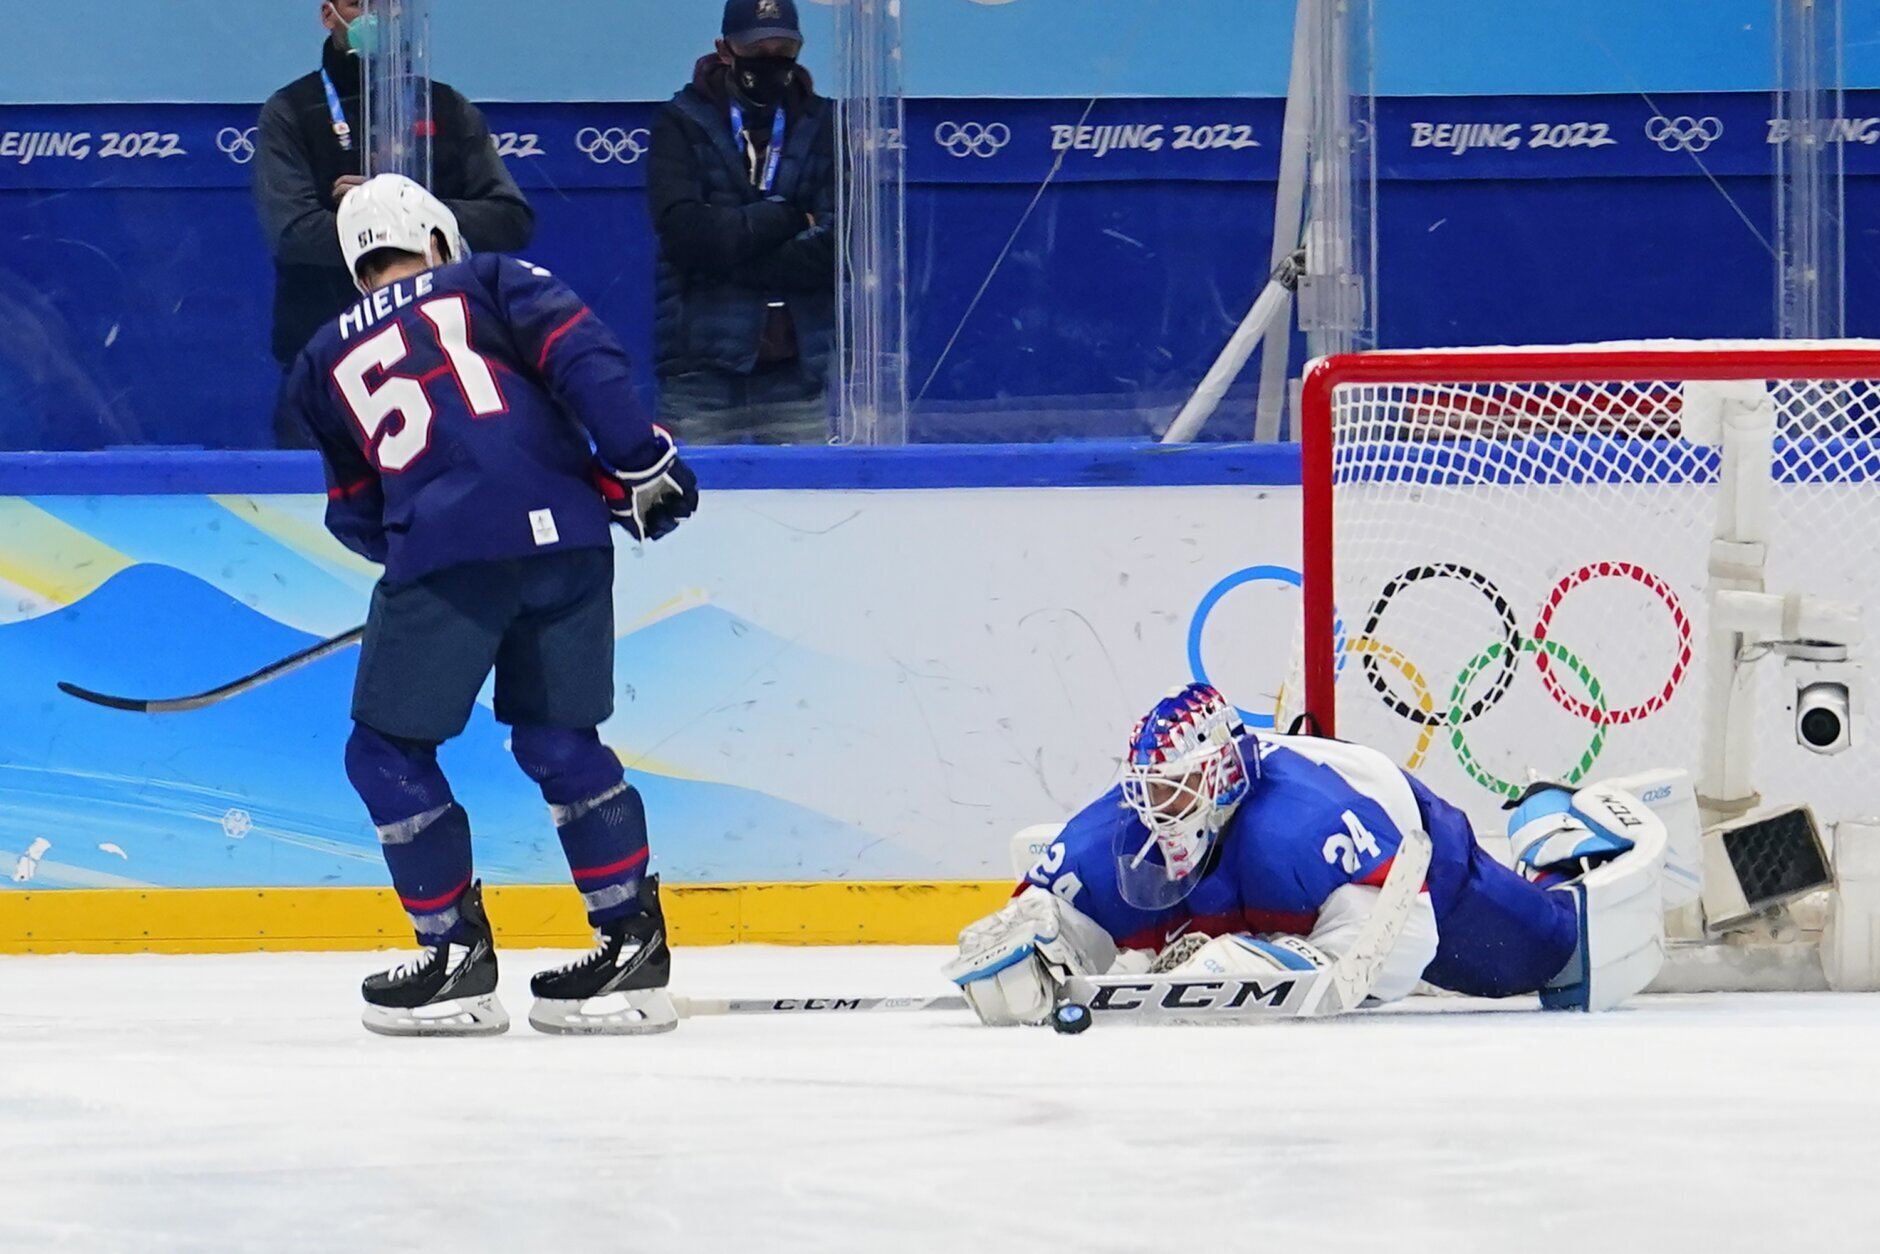 USA Men's hockey team stunned by Slovakia in shootout - TownLift